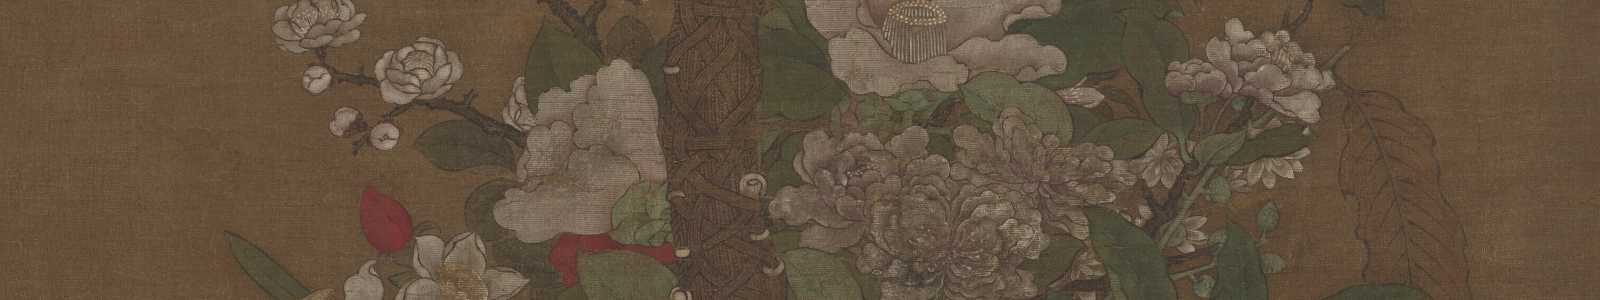 Thoughts Across the Waters: Asian Art from the David Drabkin Collection